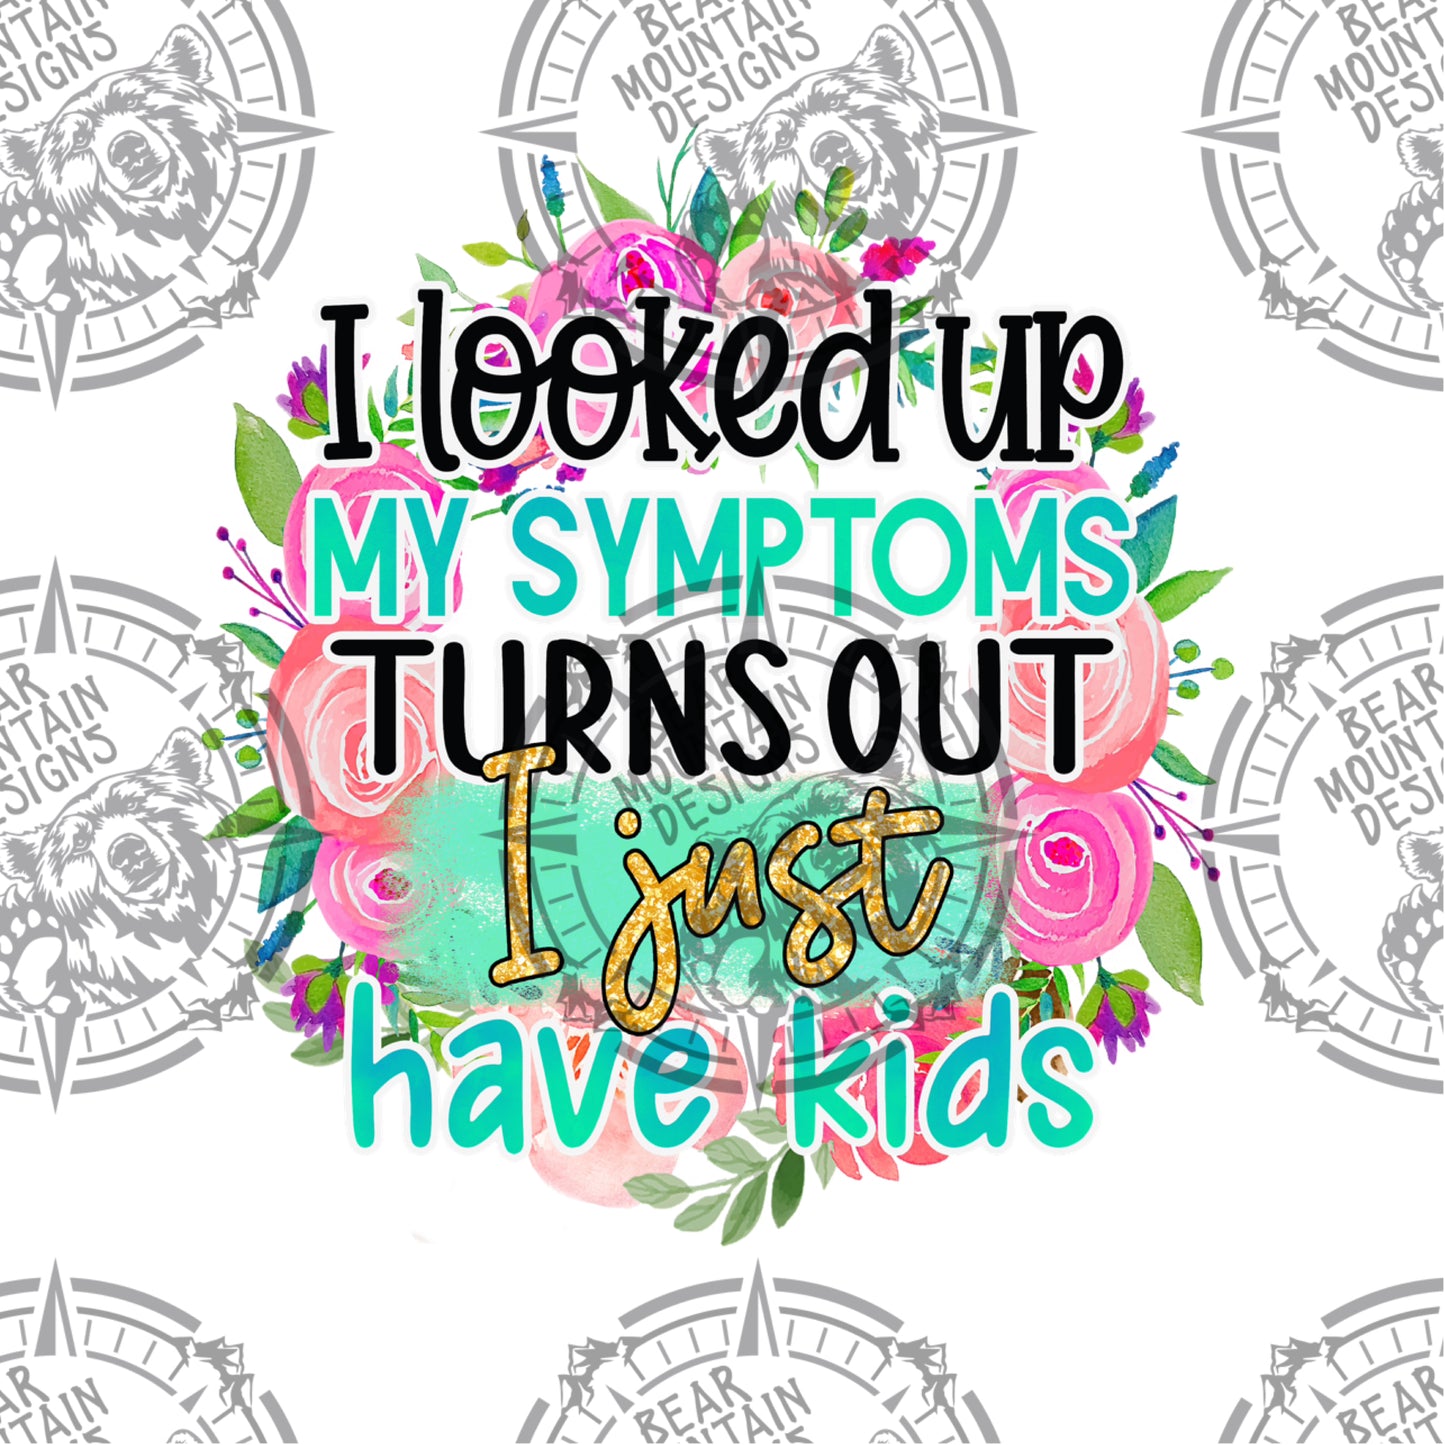 Looked Up My Symptoms Turns Out I Have Kids